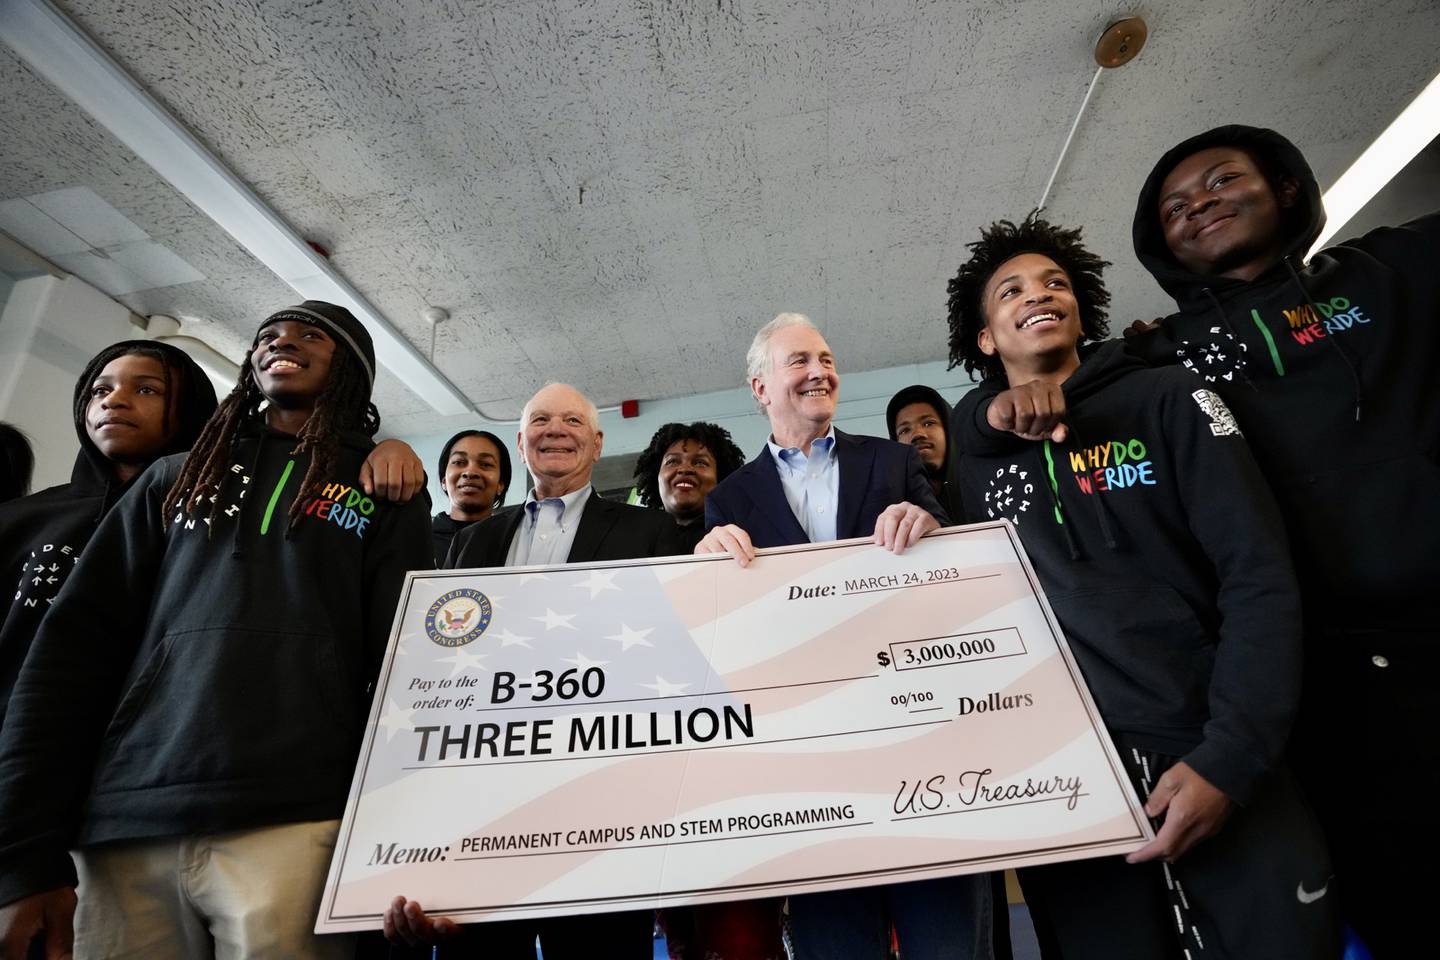 Senators Ben Cardin and Chris Van Hollen present a check for three million dollars to B-360 at a press conference to announce federal funding to build the nation’s first dirt bike campus on March 24, 2023.